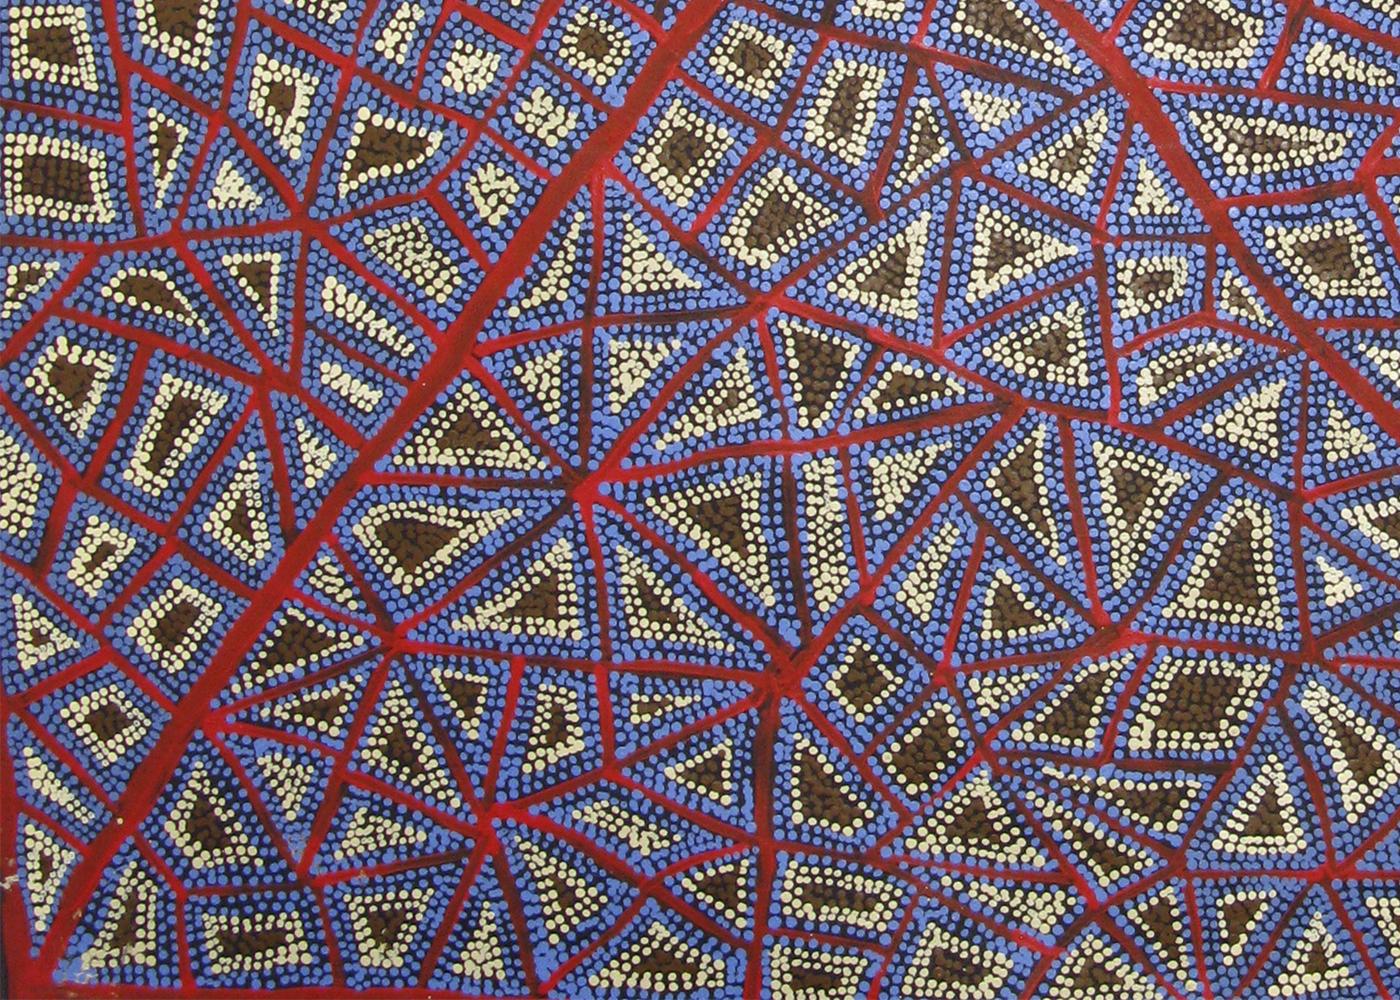 Adrian Young, abstract red, blue and white Australian Aboriginal Art painting For Sale 2